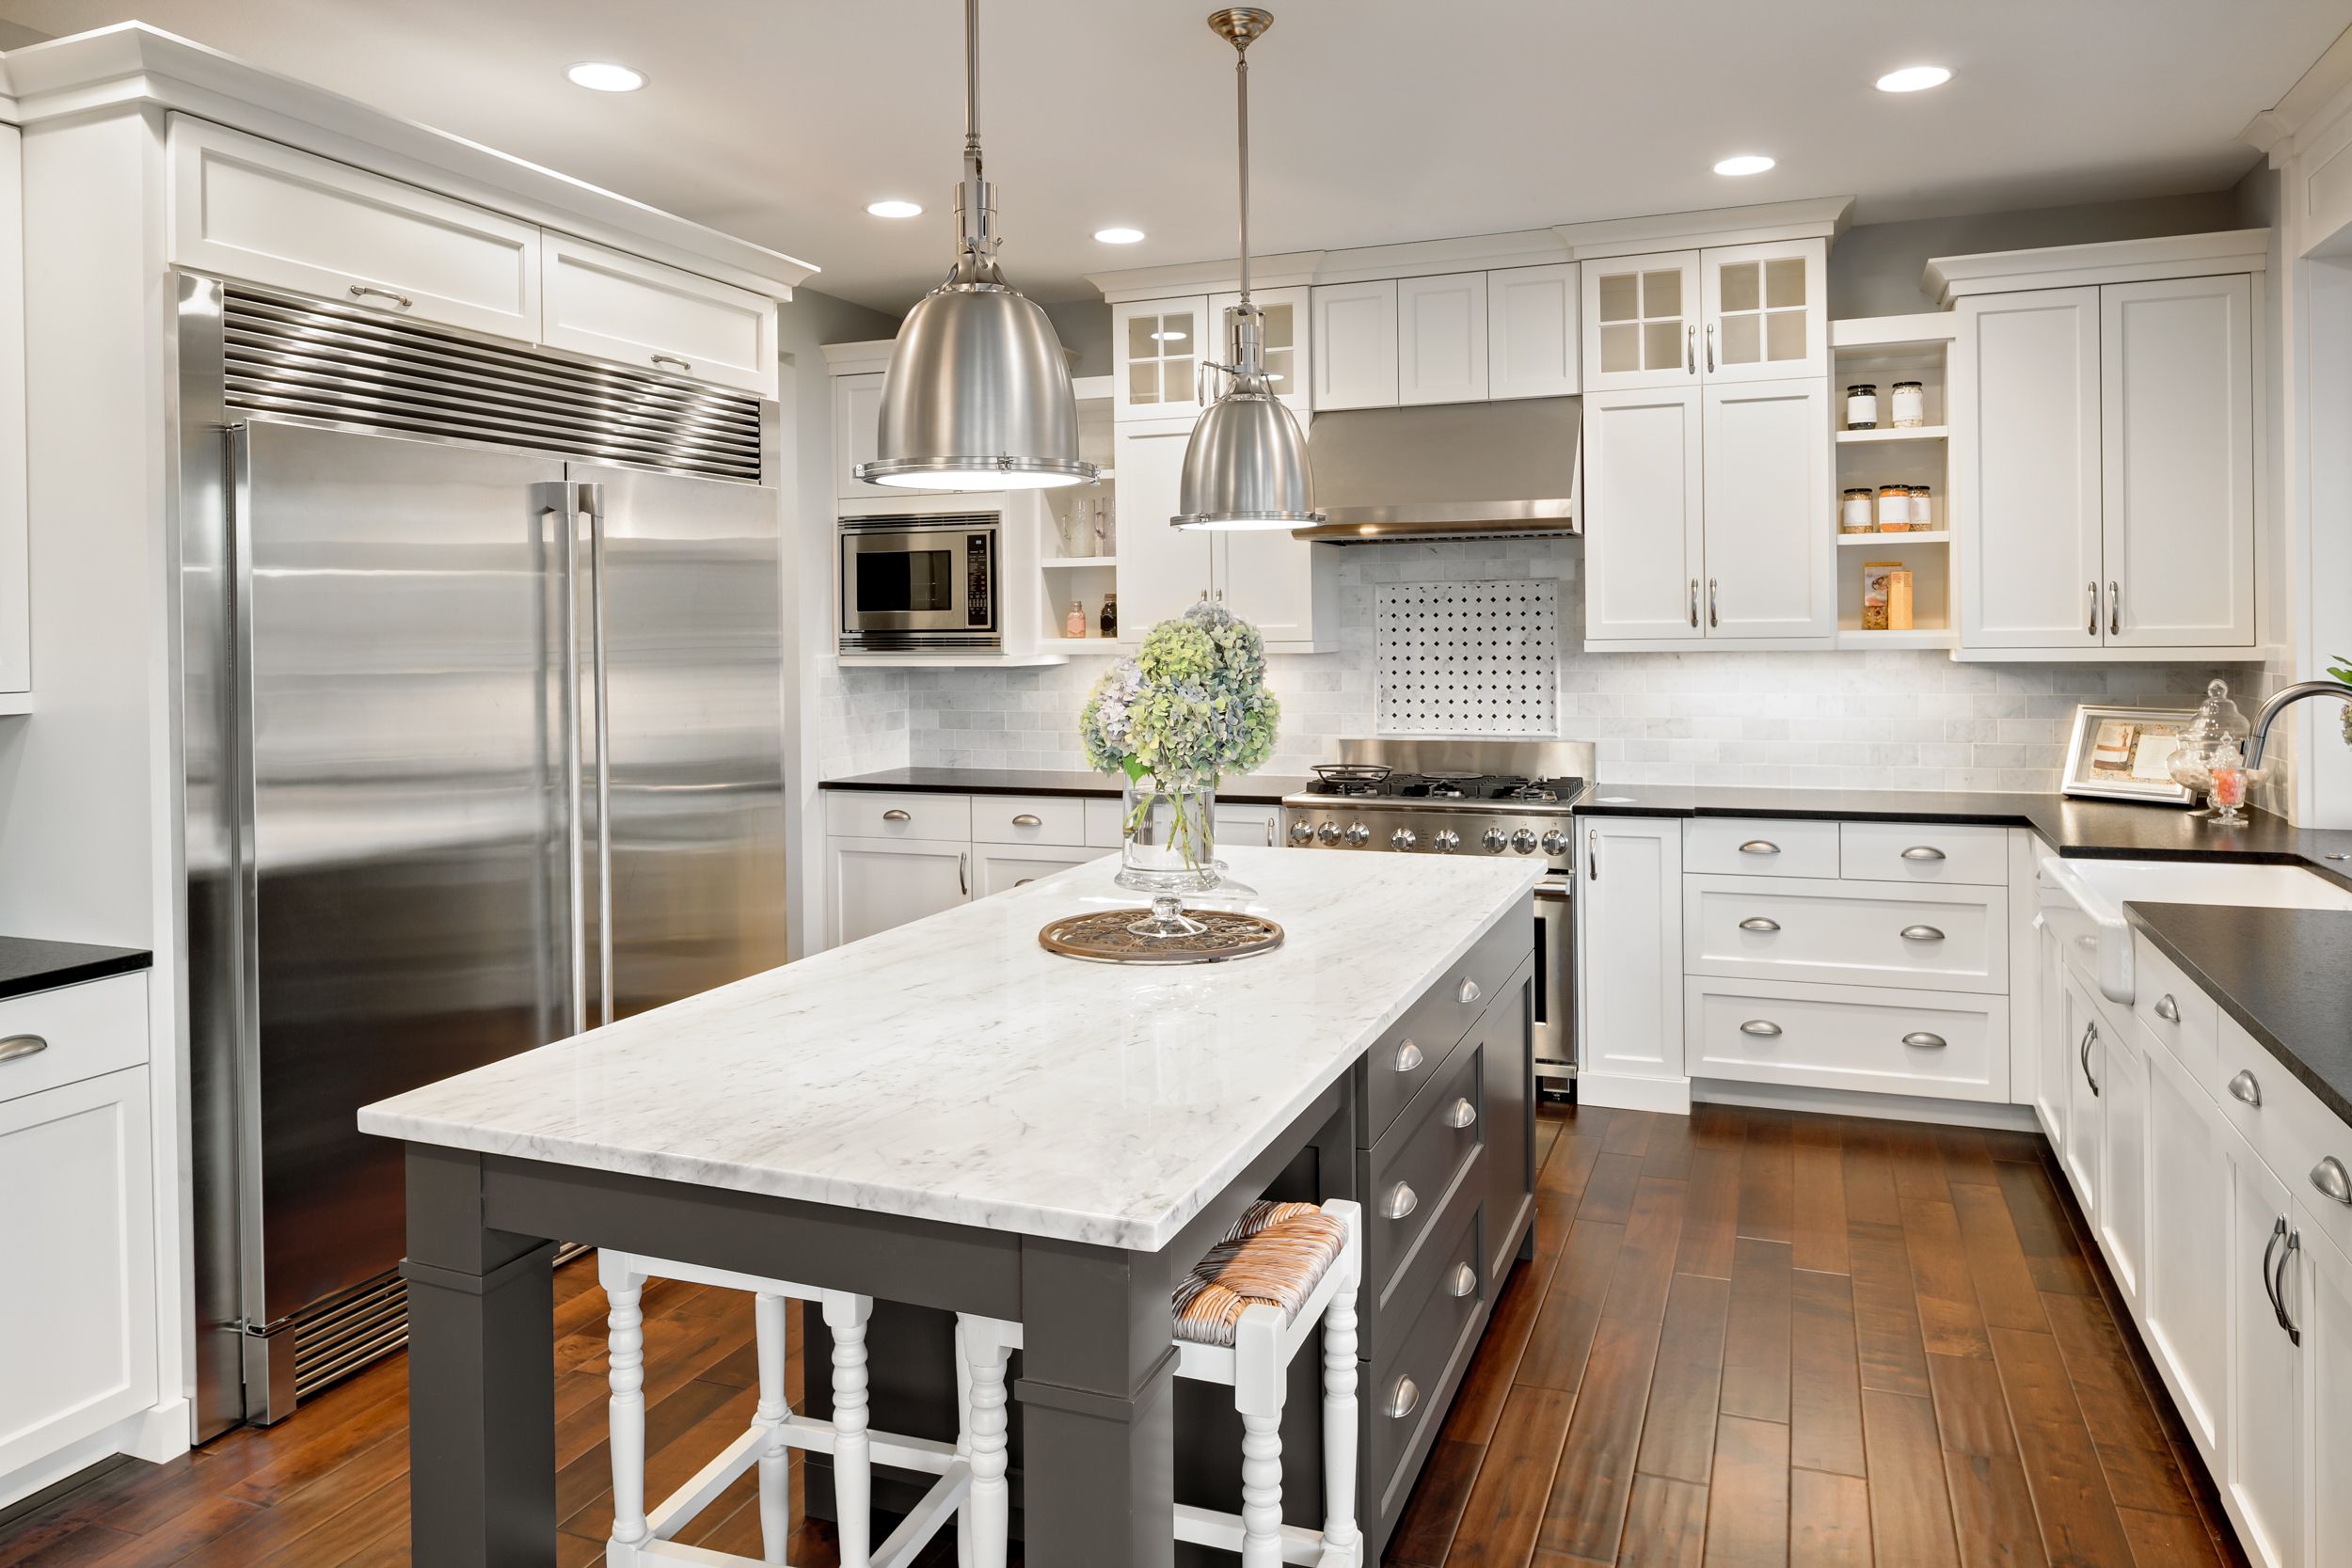 10 Factors to Consider When Remodeling Your Kitchen